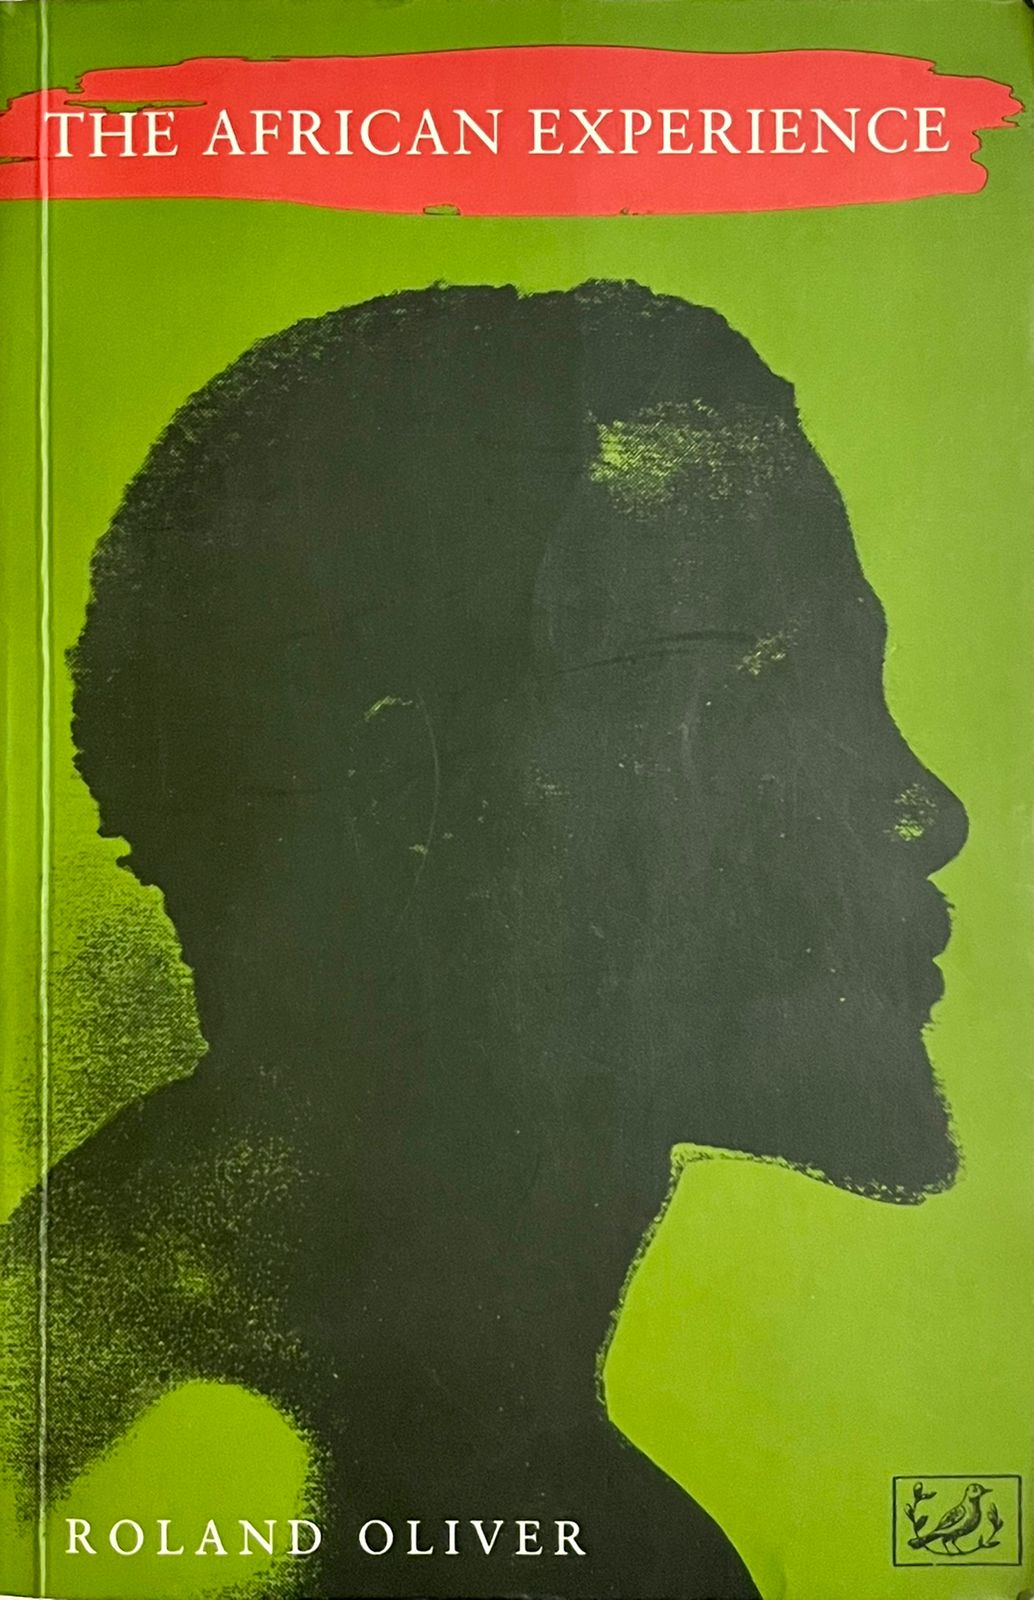 The African Experience, by Roland Anthony Oliver (used)